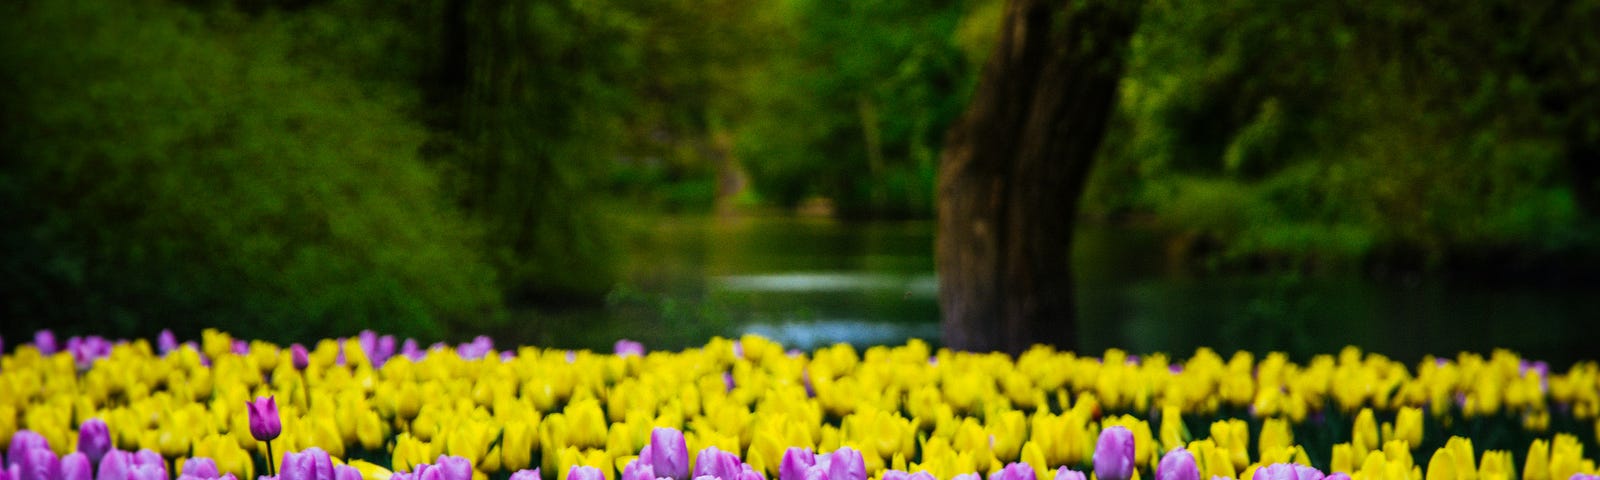 purple, pink, and yellow tulips